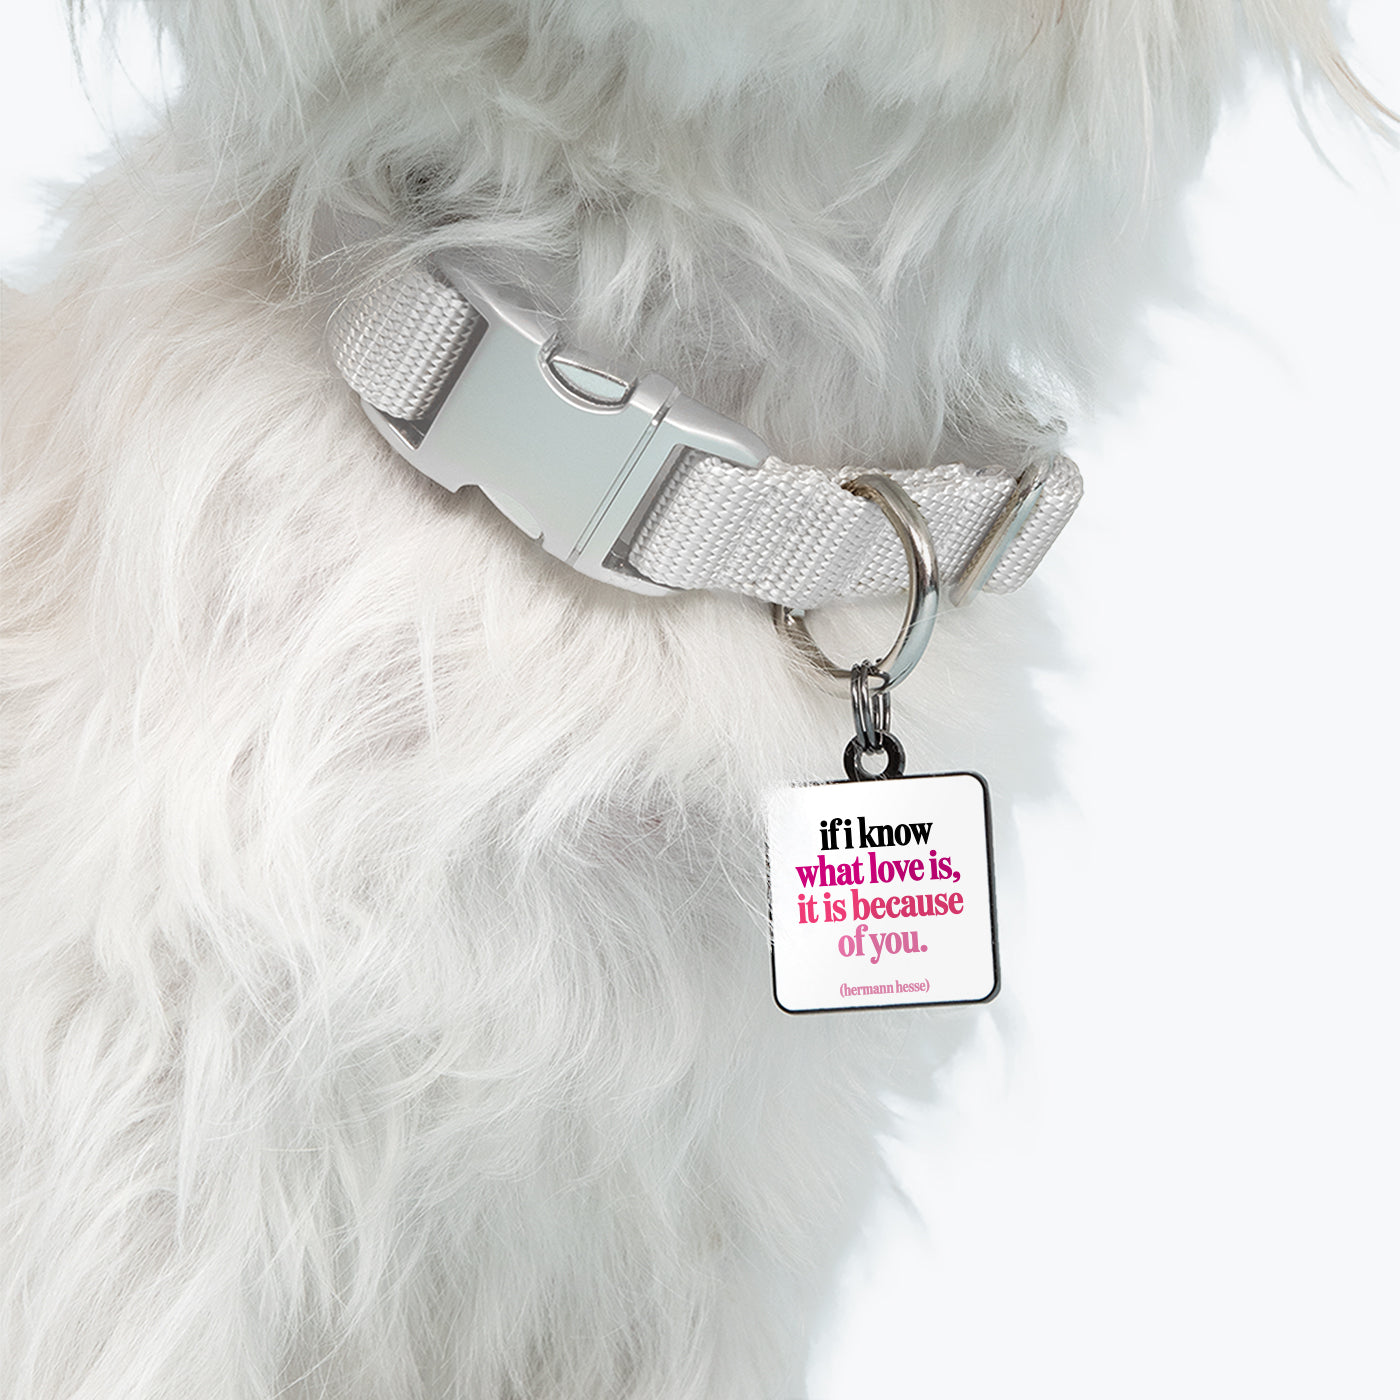 "if i know what love is" pet collar charm